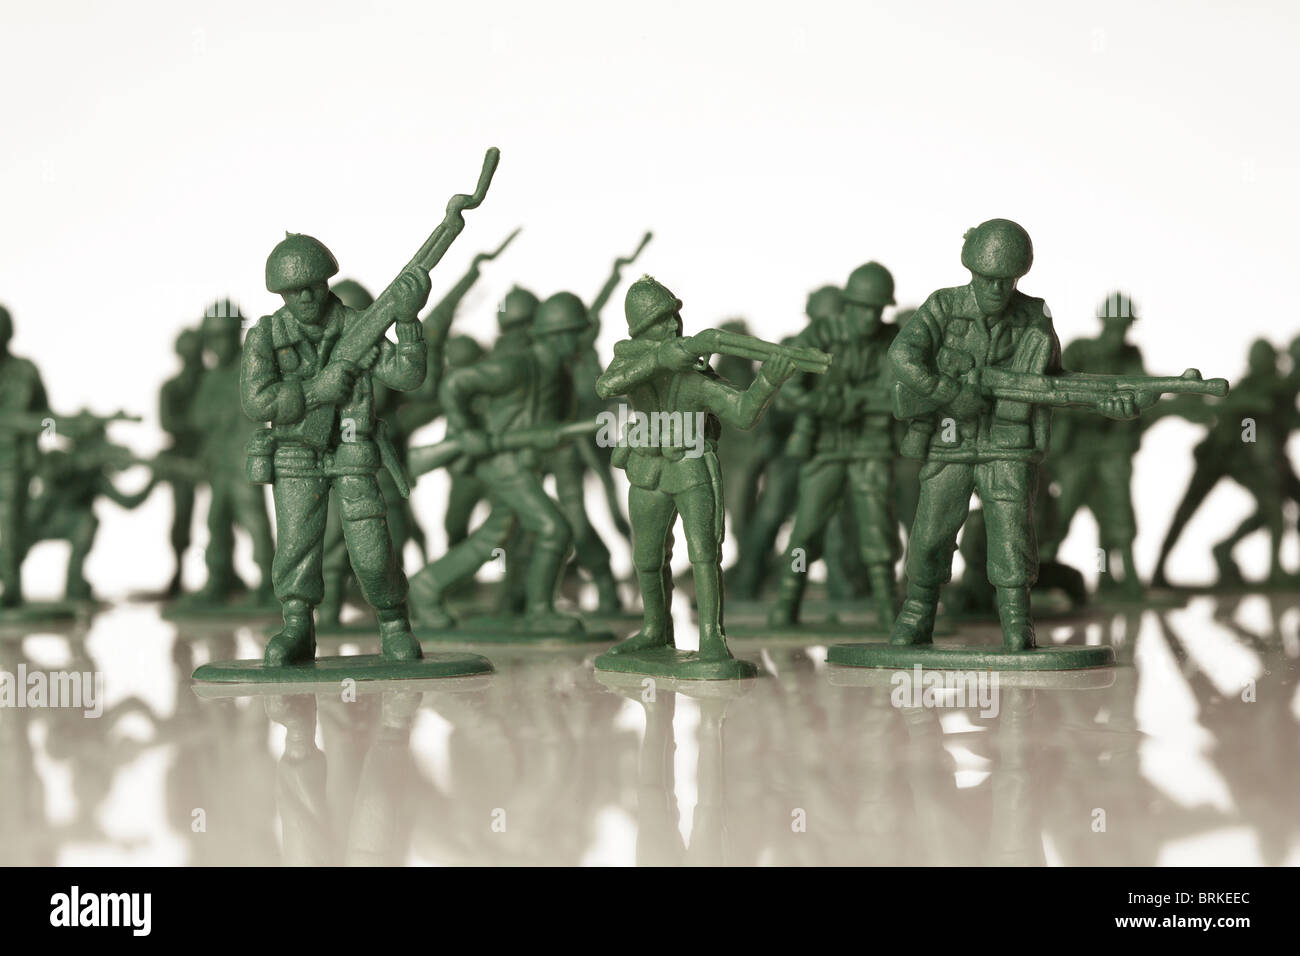 green toy soldiers out of focus in a line Stock Photo